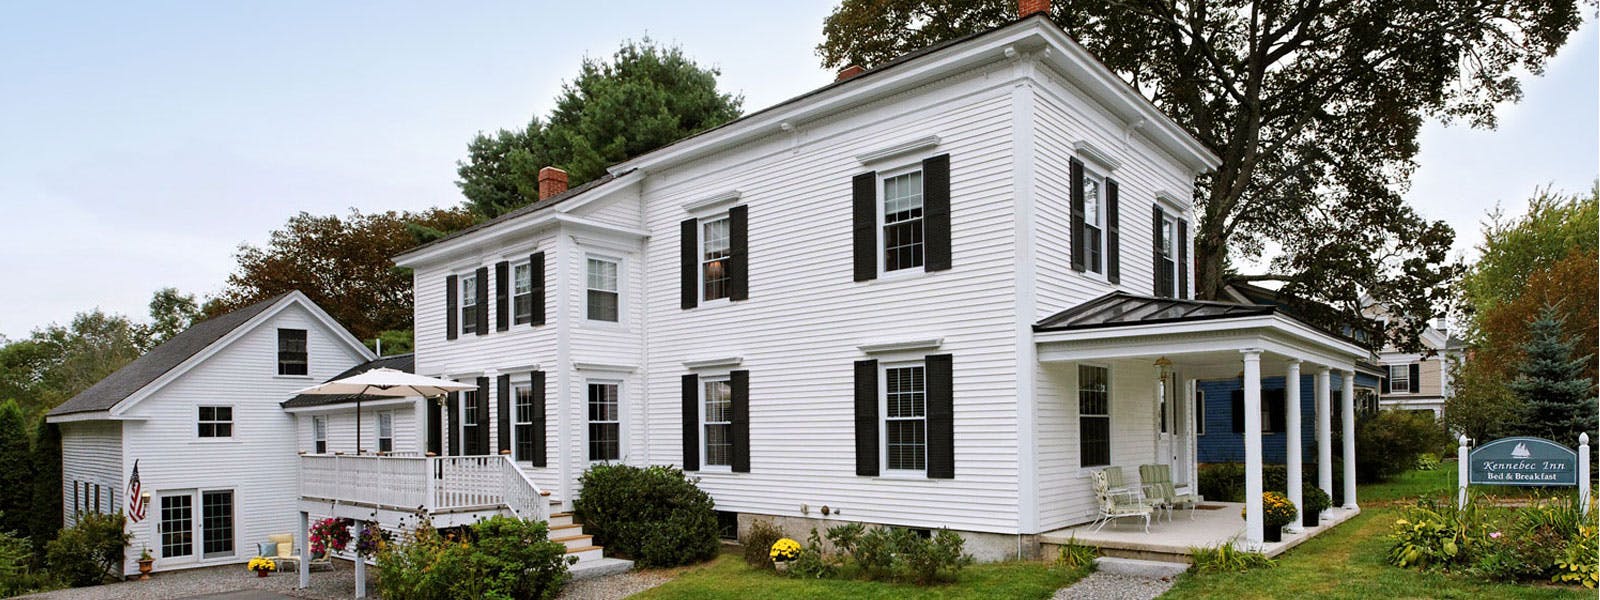 Exterior photo of the Kennebec Inn -- a white Italianate with black shutters.